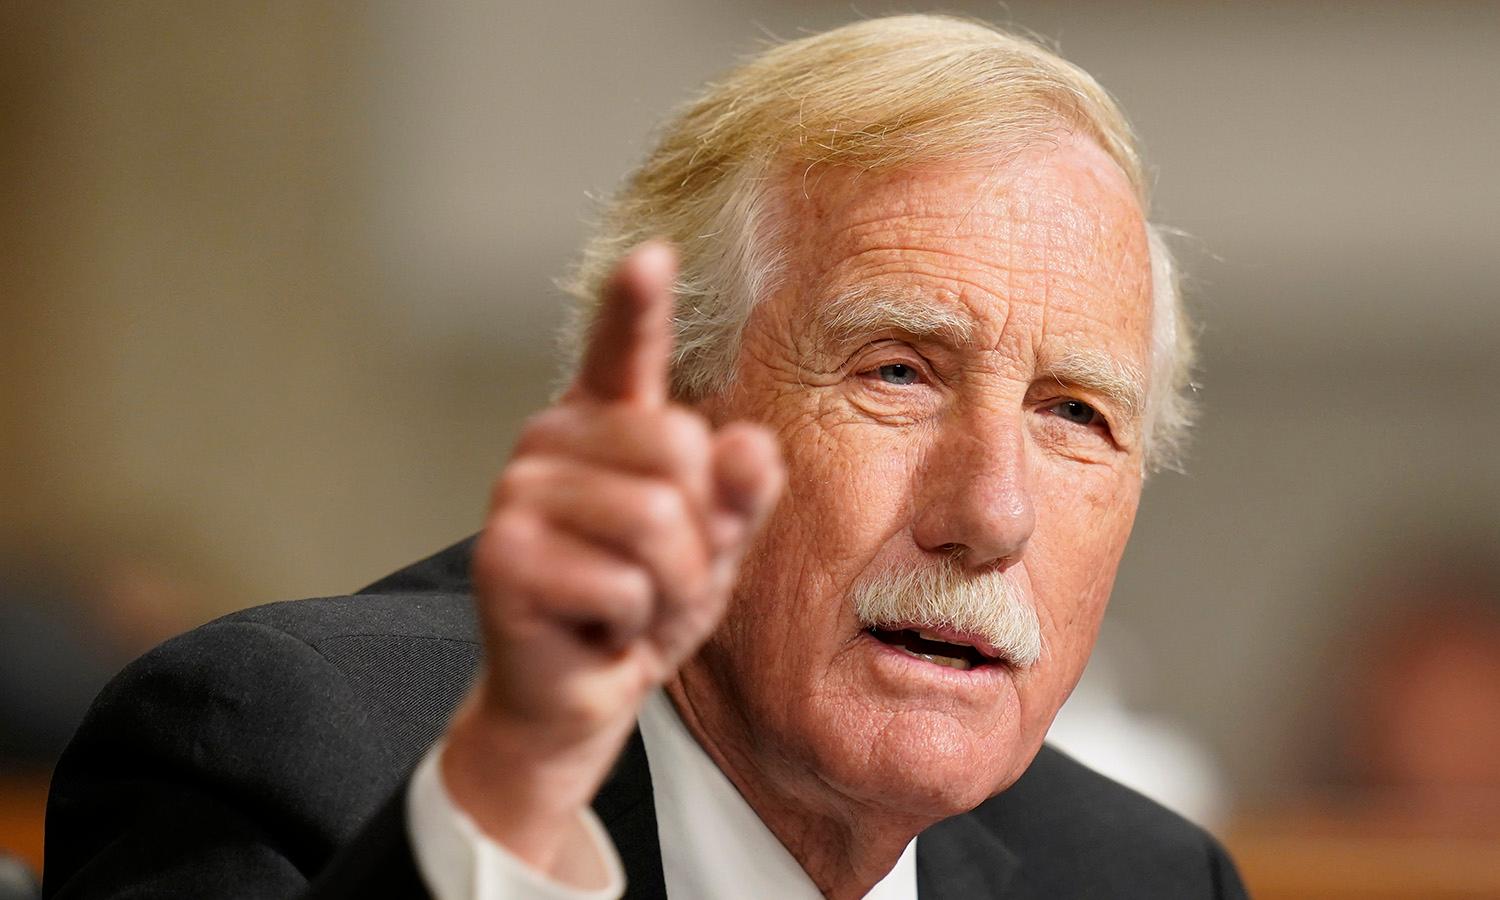 Sen. Angus King, I-Maine, speaks during a Senate Armed Services Committee hearing on Capitol Hill on Sept. 28, 2021, in Washington. Two dozen senators want to know more about how agencies are protecting the federal government and critical infrastructure. (Photo by Patrick Semansky/Pool via Getty Images)